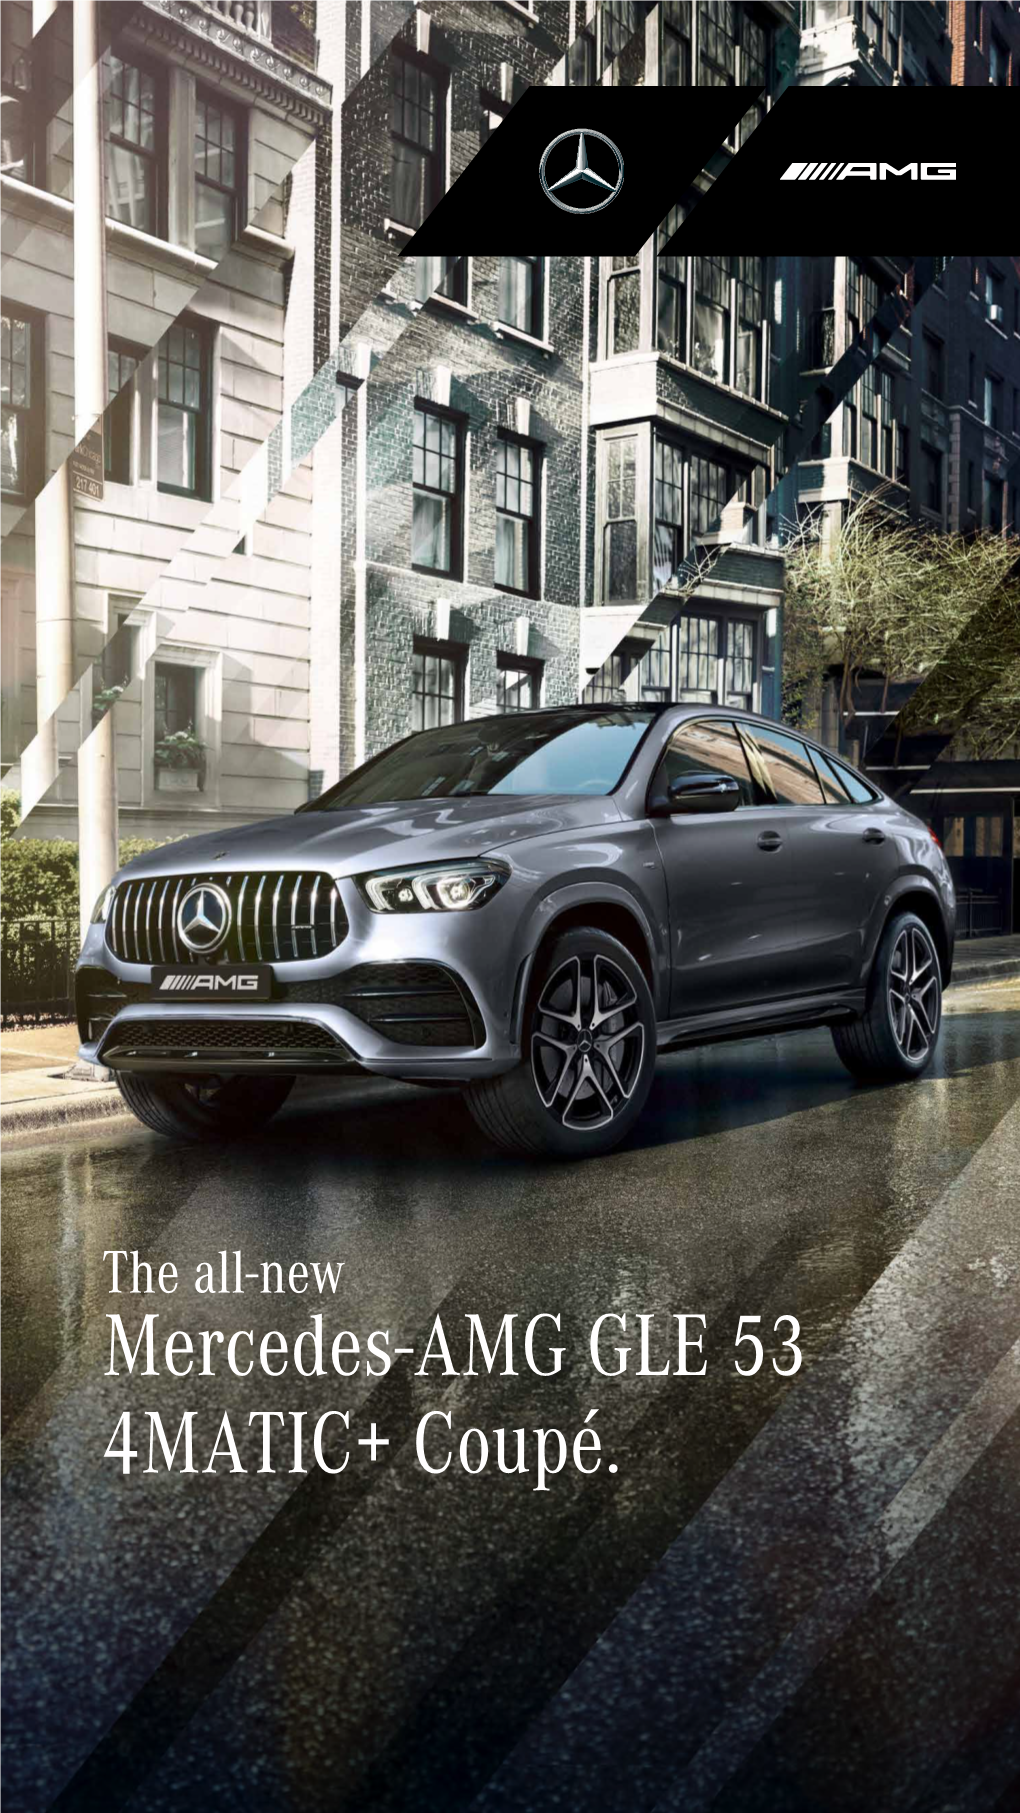 9142059 AMG GLE 53 Coupe Brochure Mobile Version July 2021